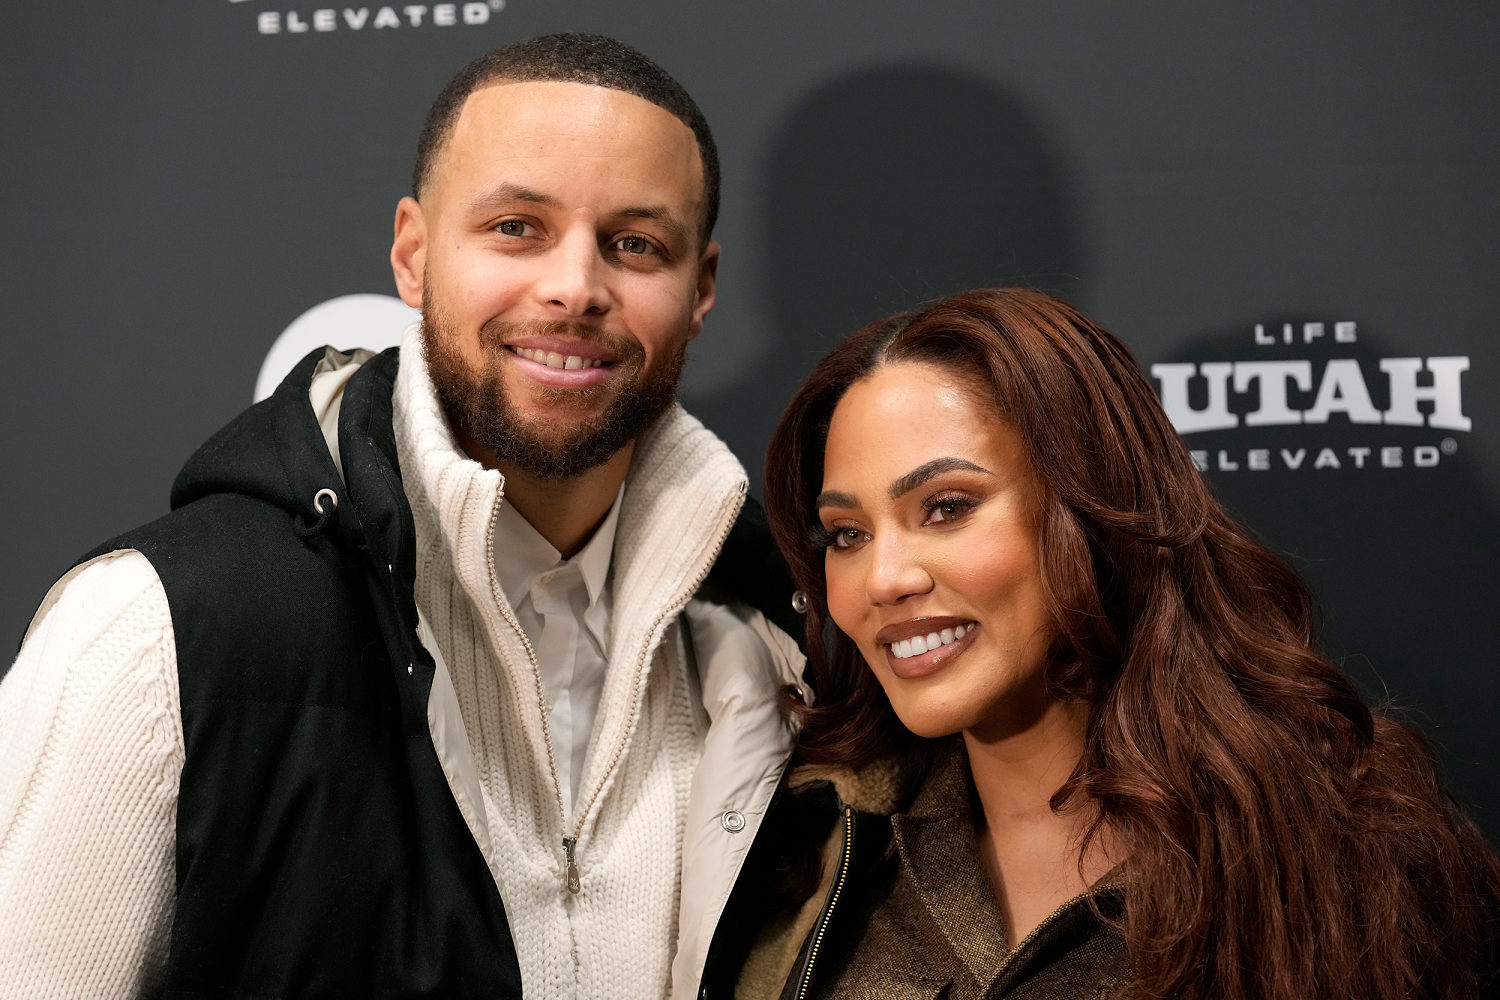 Stephen Curry and wife Ayesha planned new baby around Paris Olympics